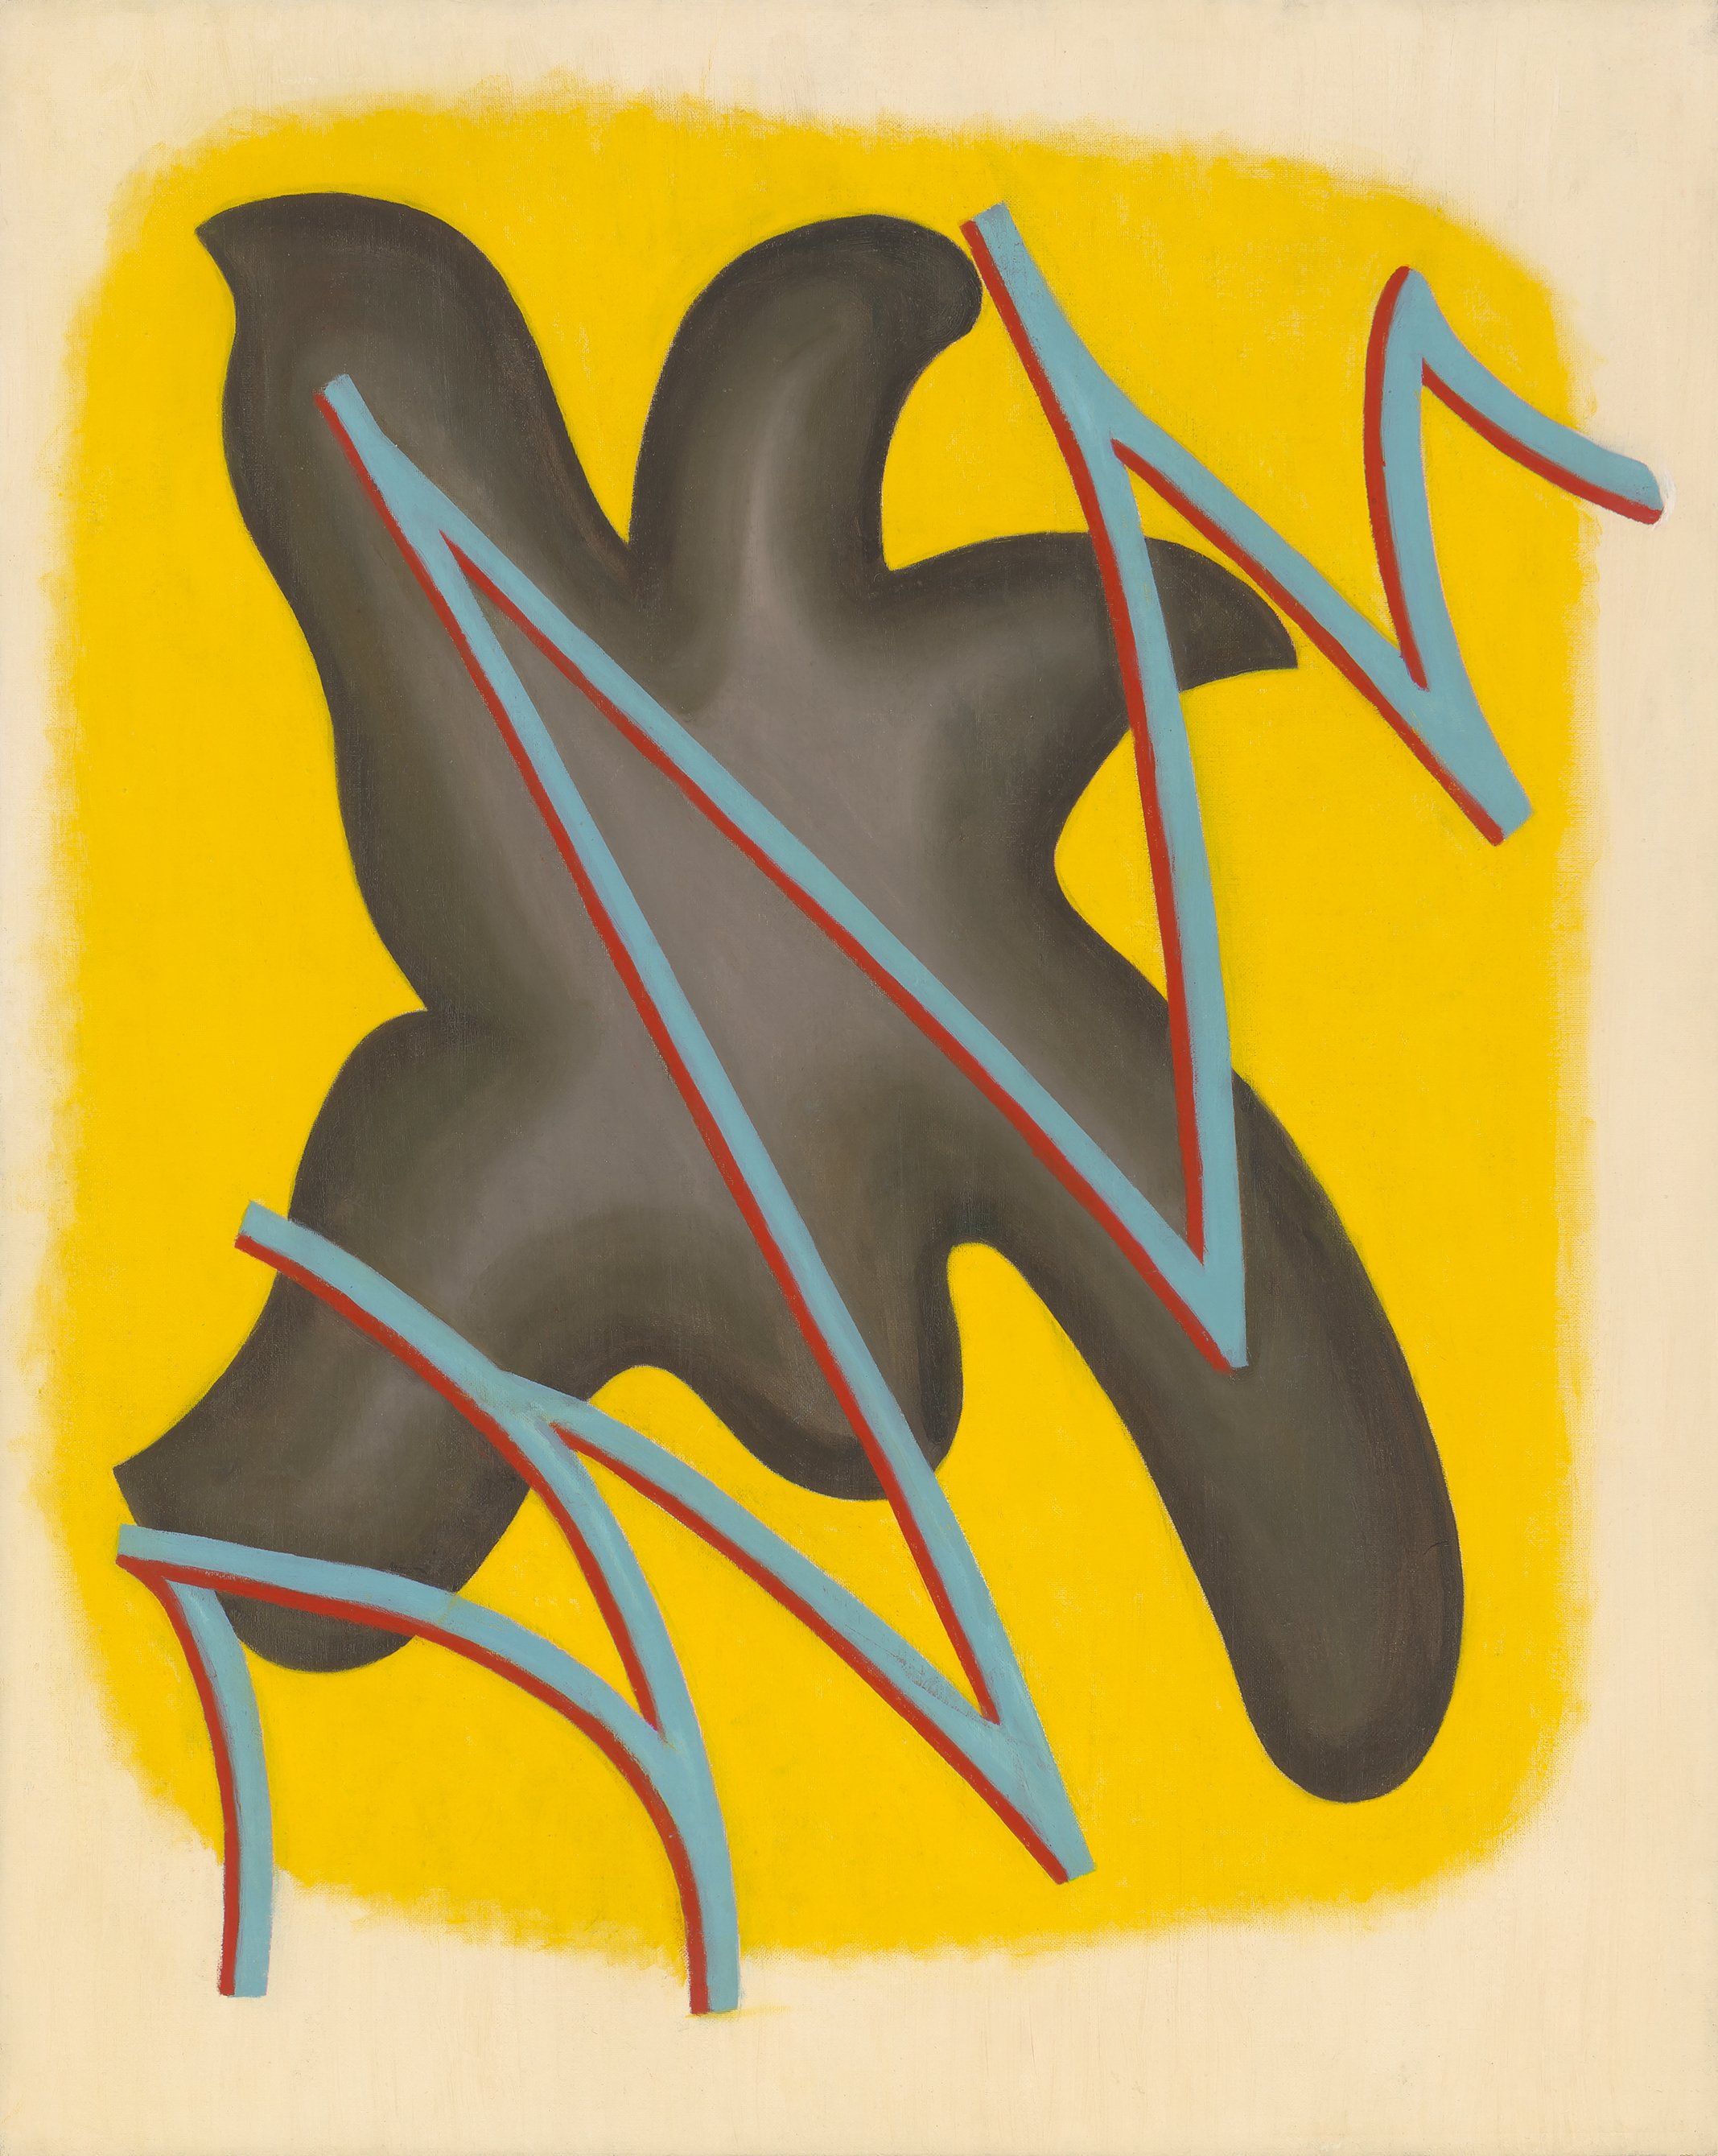 Abstract grey star-like shape on a irregular yellow plane with a blue and red zig-zag diagonally across.